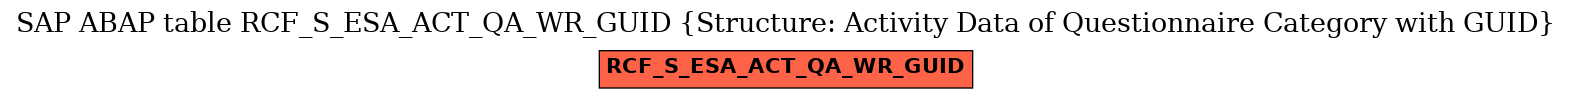 E-R Diagram for table RCF_S_ESA_ACT_QA_WR_GUID (Structure: Activity Data of Questionnaire Category with GUID)